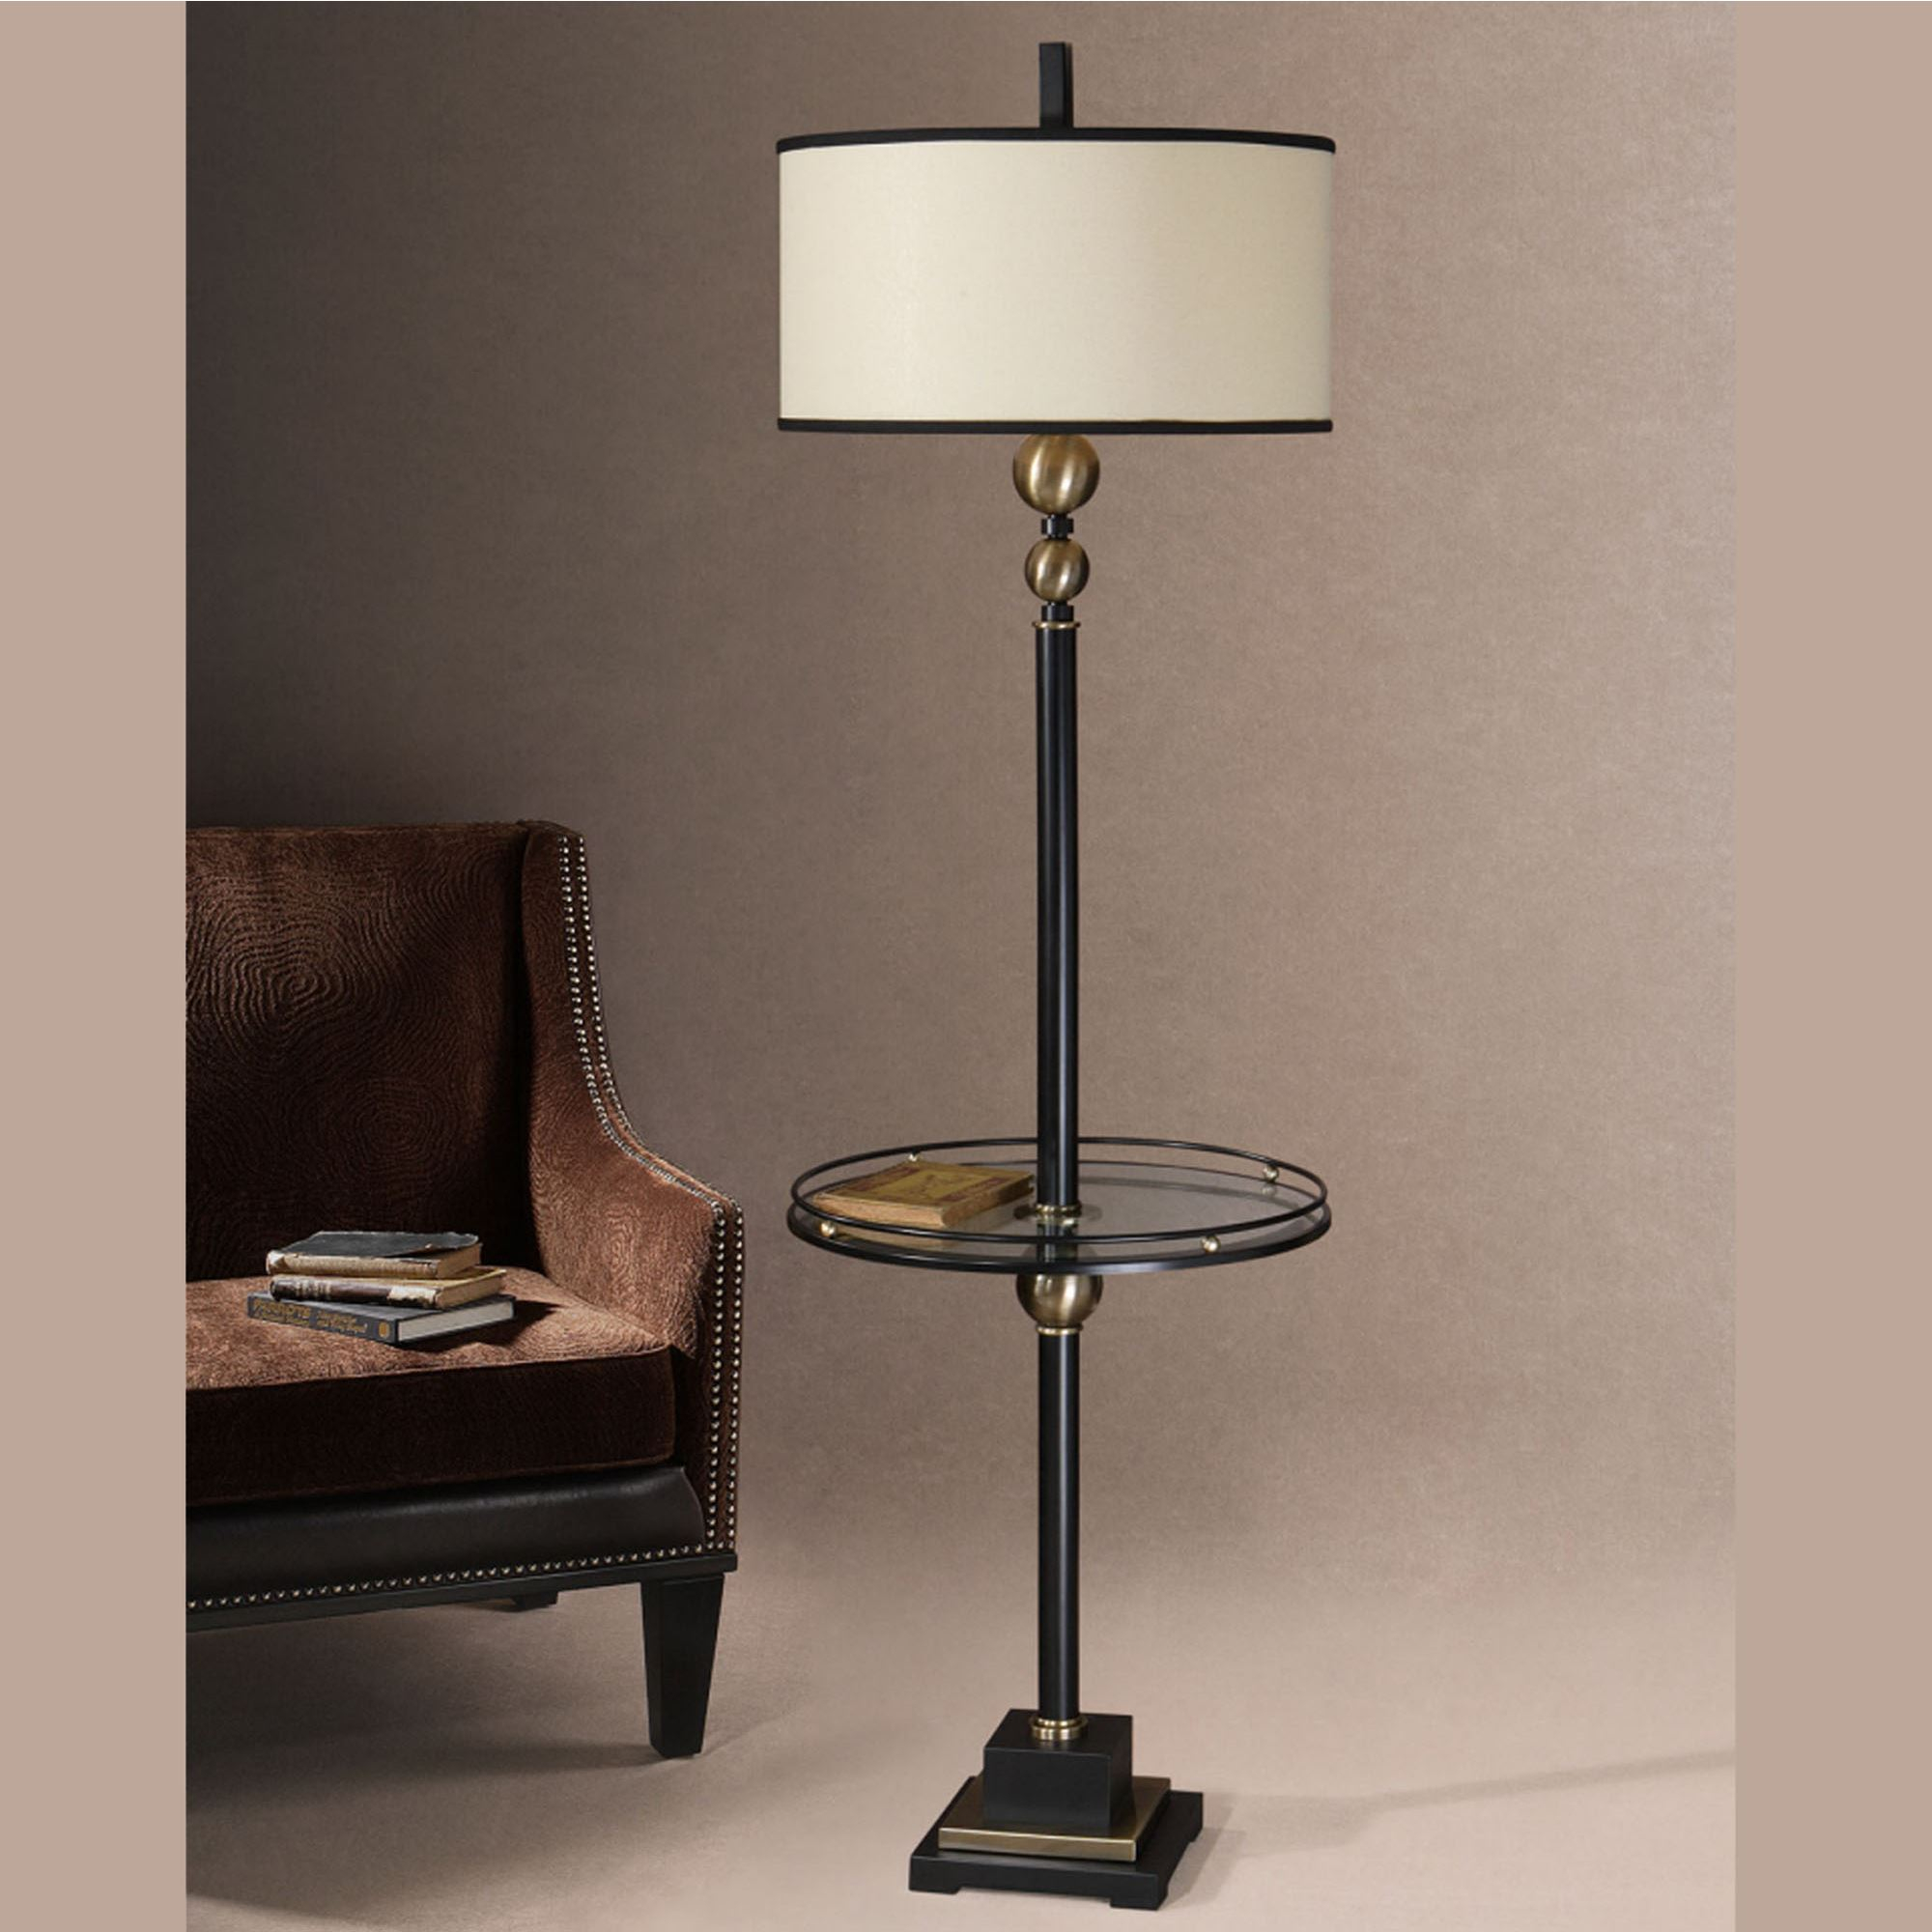 Creative End Tables With Lamp Attached Useful Side Tables in size 2000 X 2000